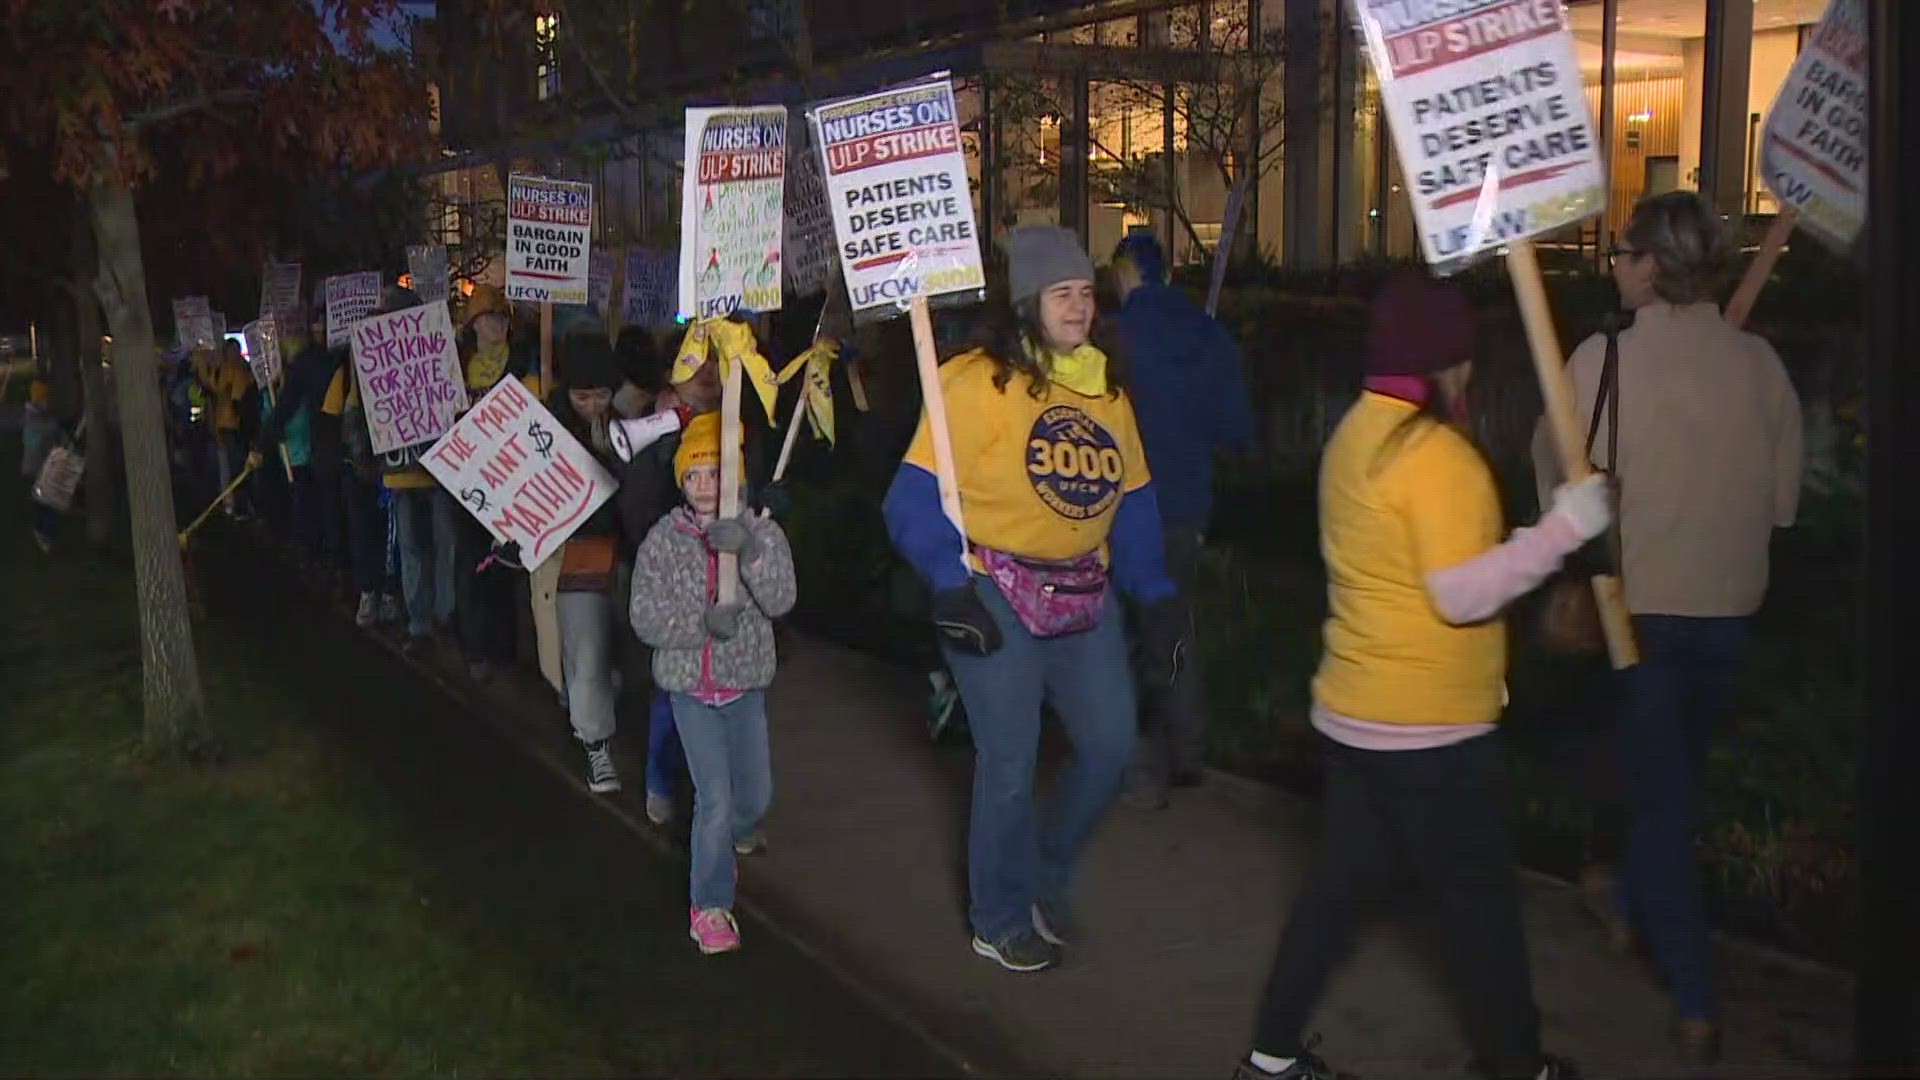 Nurses are on strike in Everett after labor negotiations have failed to result in a new contract at Providence Regional Medical Center Everett.